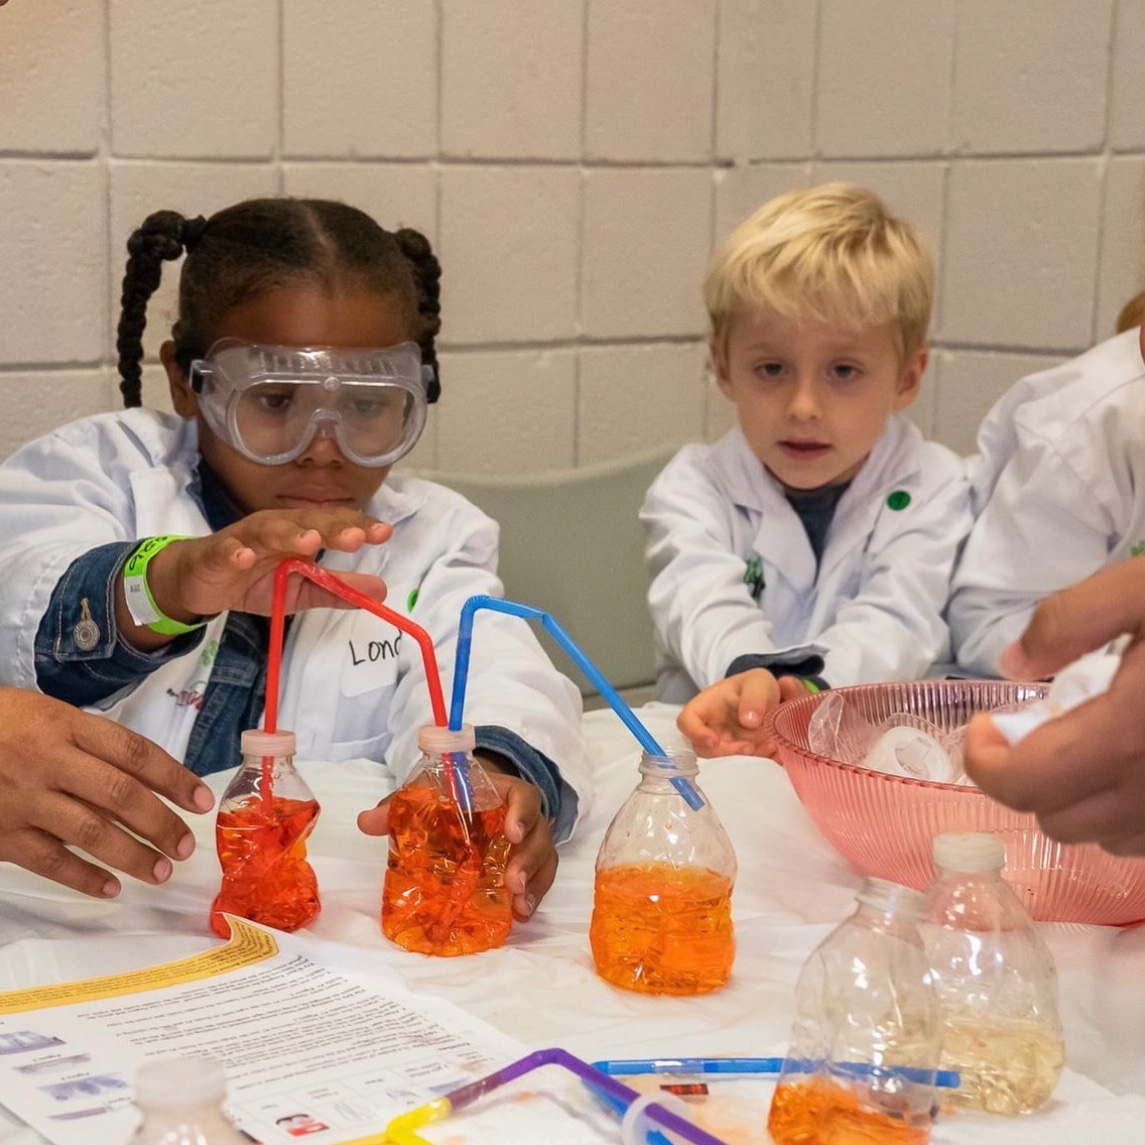 #MemberMonday | Today, we're highlighting @STEMNOLA! They inspire over 5,000 young minds through innovative STEM programs, transforming science, technology, engineering, and math into thrilling adventures! Ready to join the STEM revolution? Learn more: bit.ly/3VL3pX3